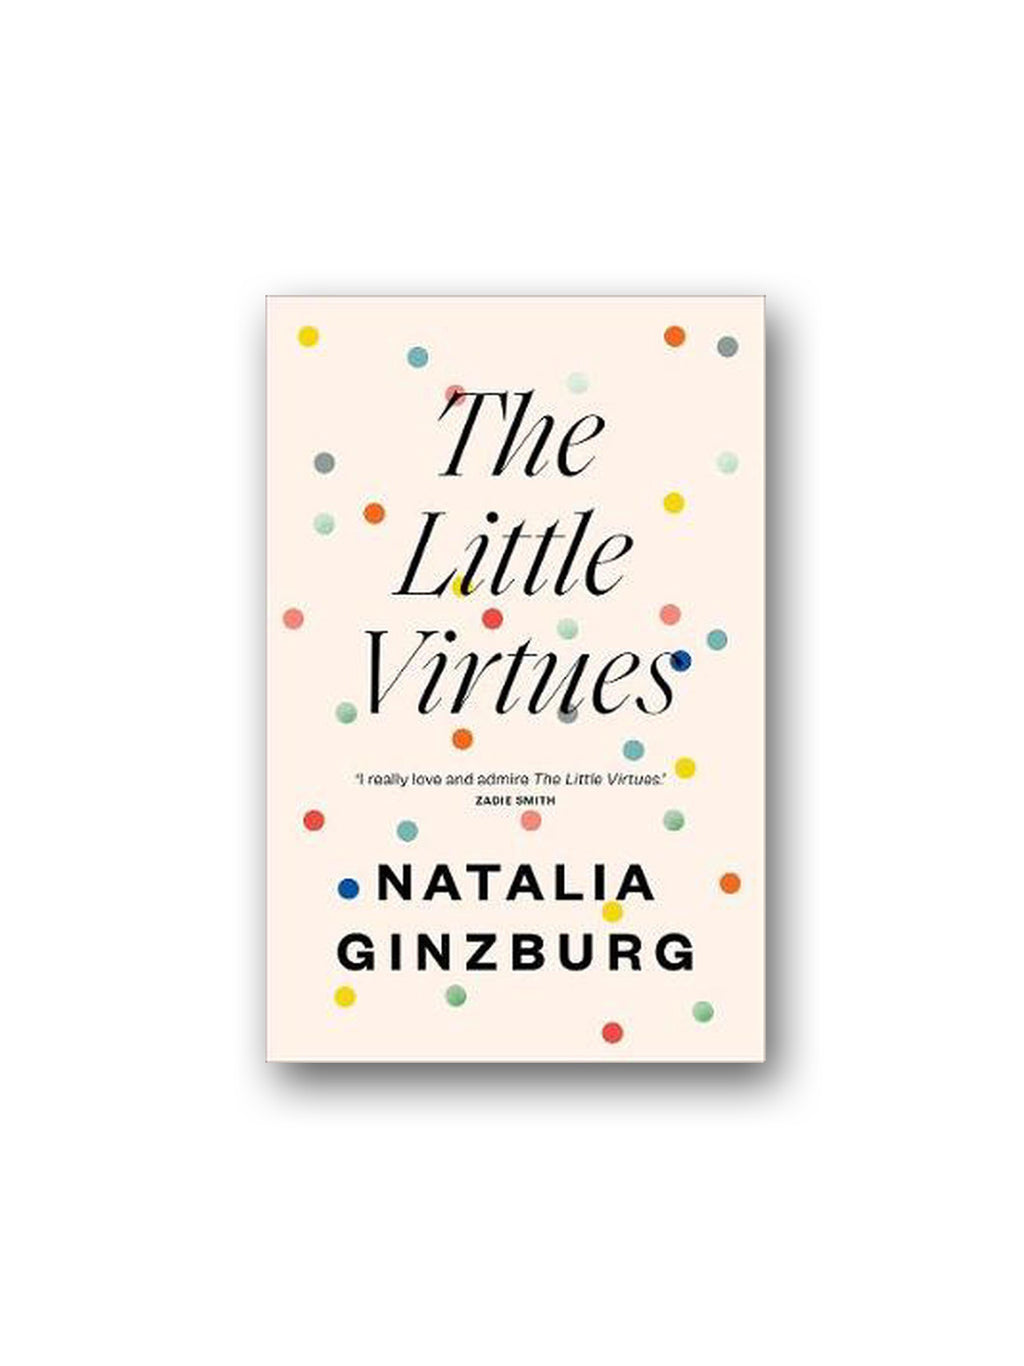 The Little Virtues